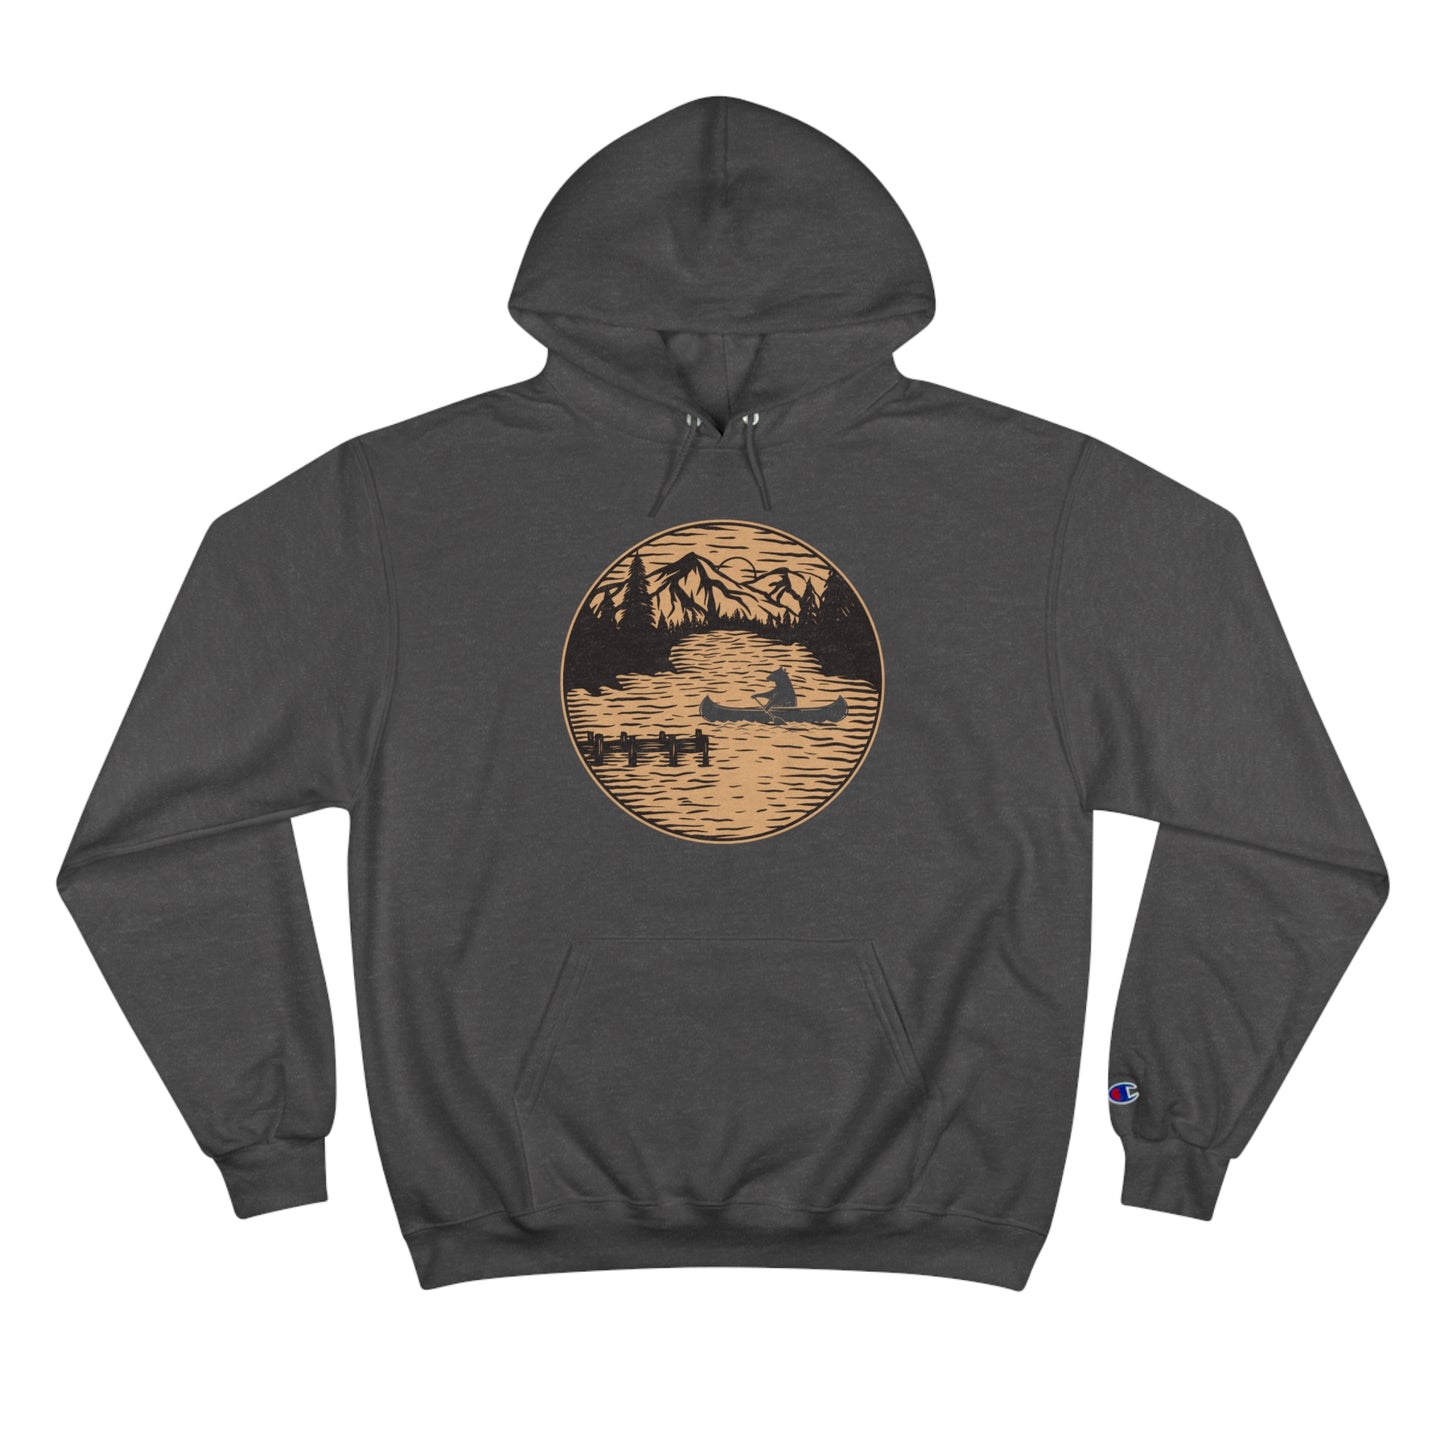 A bear taking a night time canoeing trip on the lake on this very comfortable Champion Hoodie.